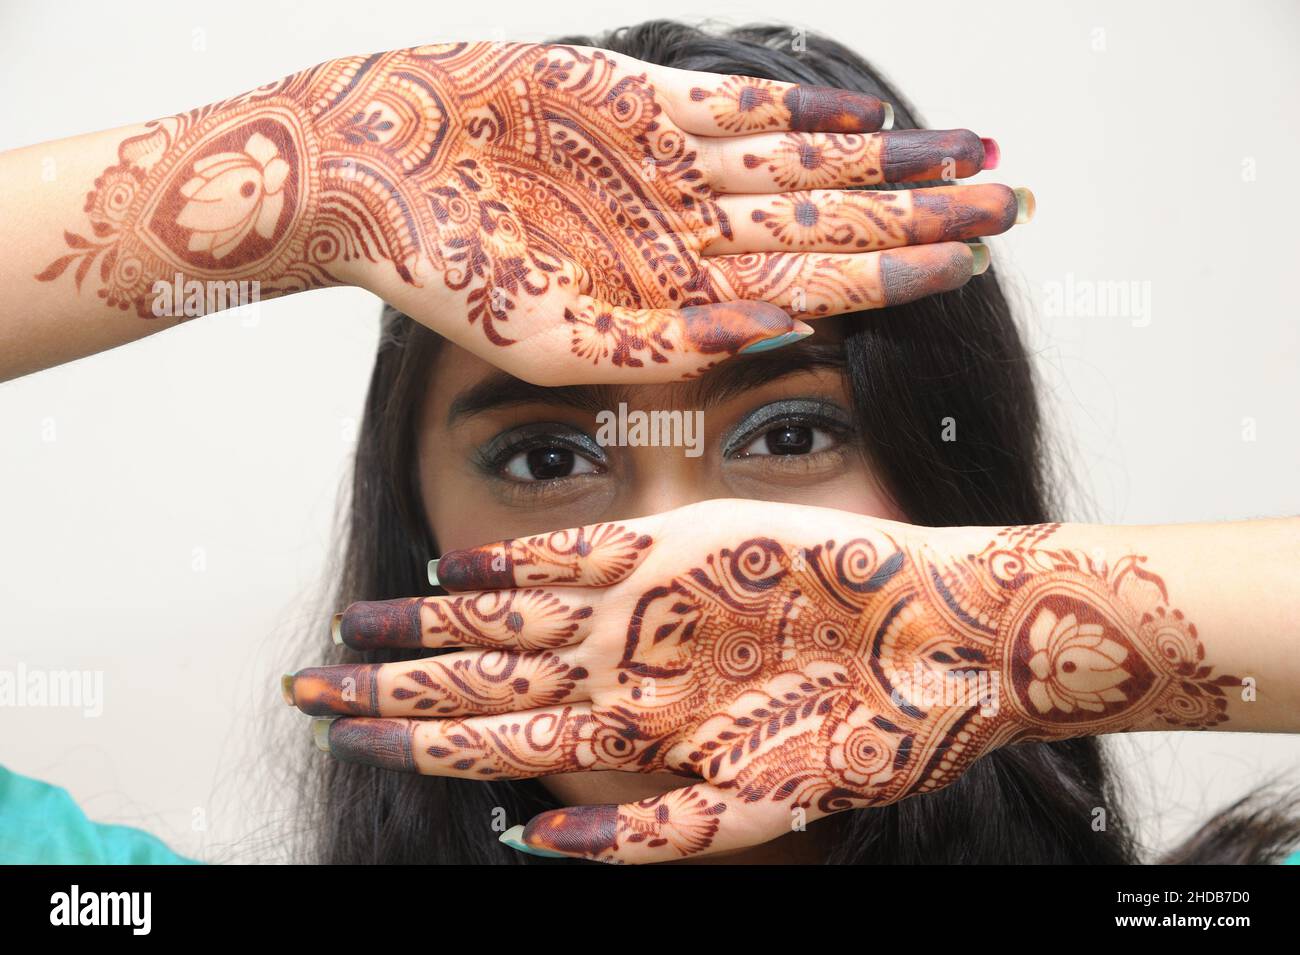 India July 24 2021 Beautiful young indian teenager girl showing artwork ...